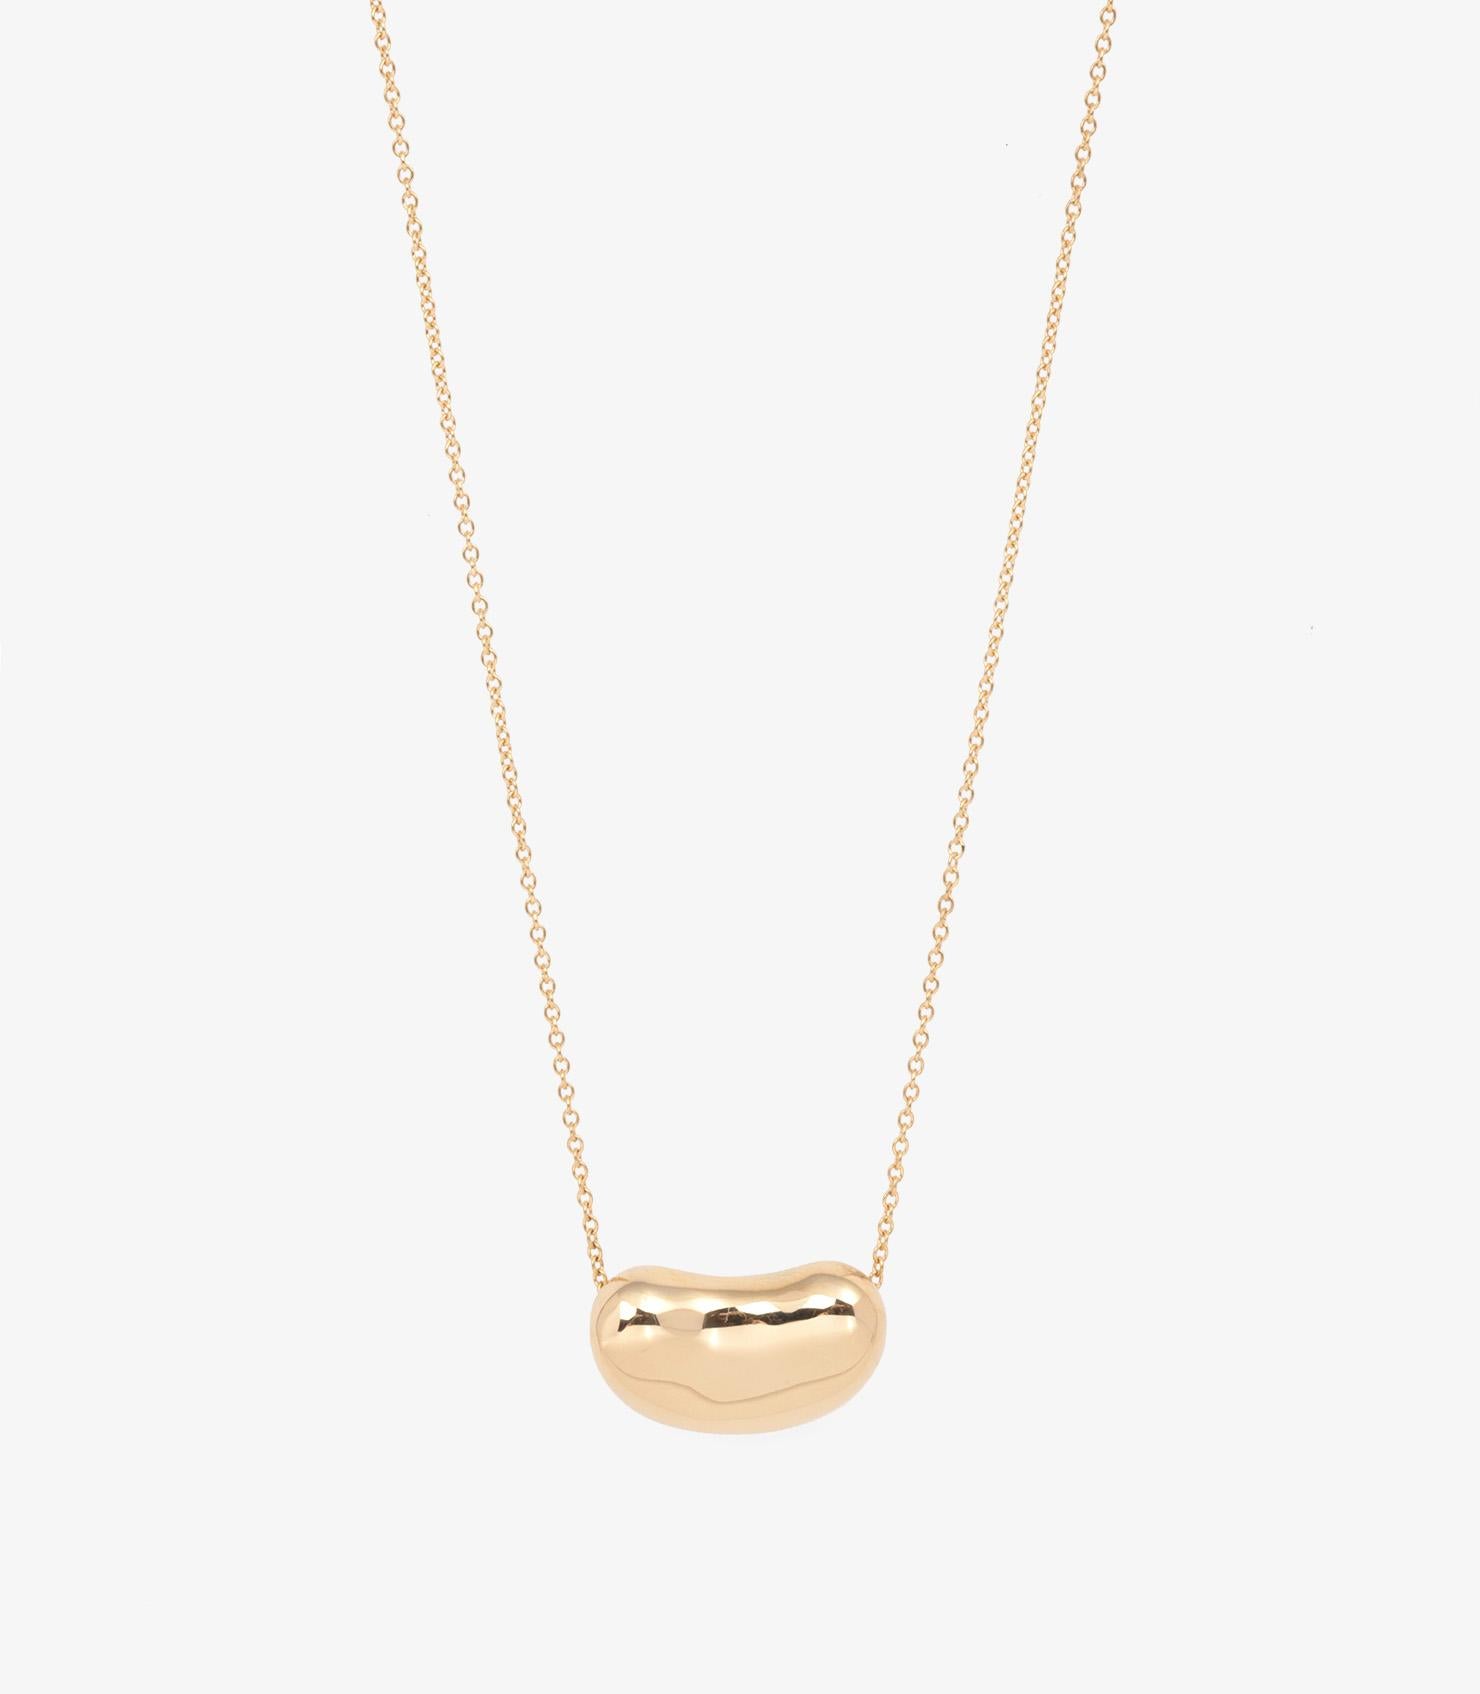 Tiffany & Co. 18ct Yellow Gold Elsa Peretti 18mm Bean Design Pendant

Brand- Tiffany & Co.
Model- Bean Design Necklace
Product Type- Necklace
Material(s)- 18ct Yellow Gold

Necklace Length- 40.5cm
Pendant Length- 1.8cm
Pendant Width- 1.3cm
Total